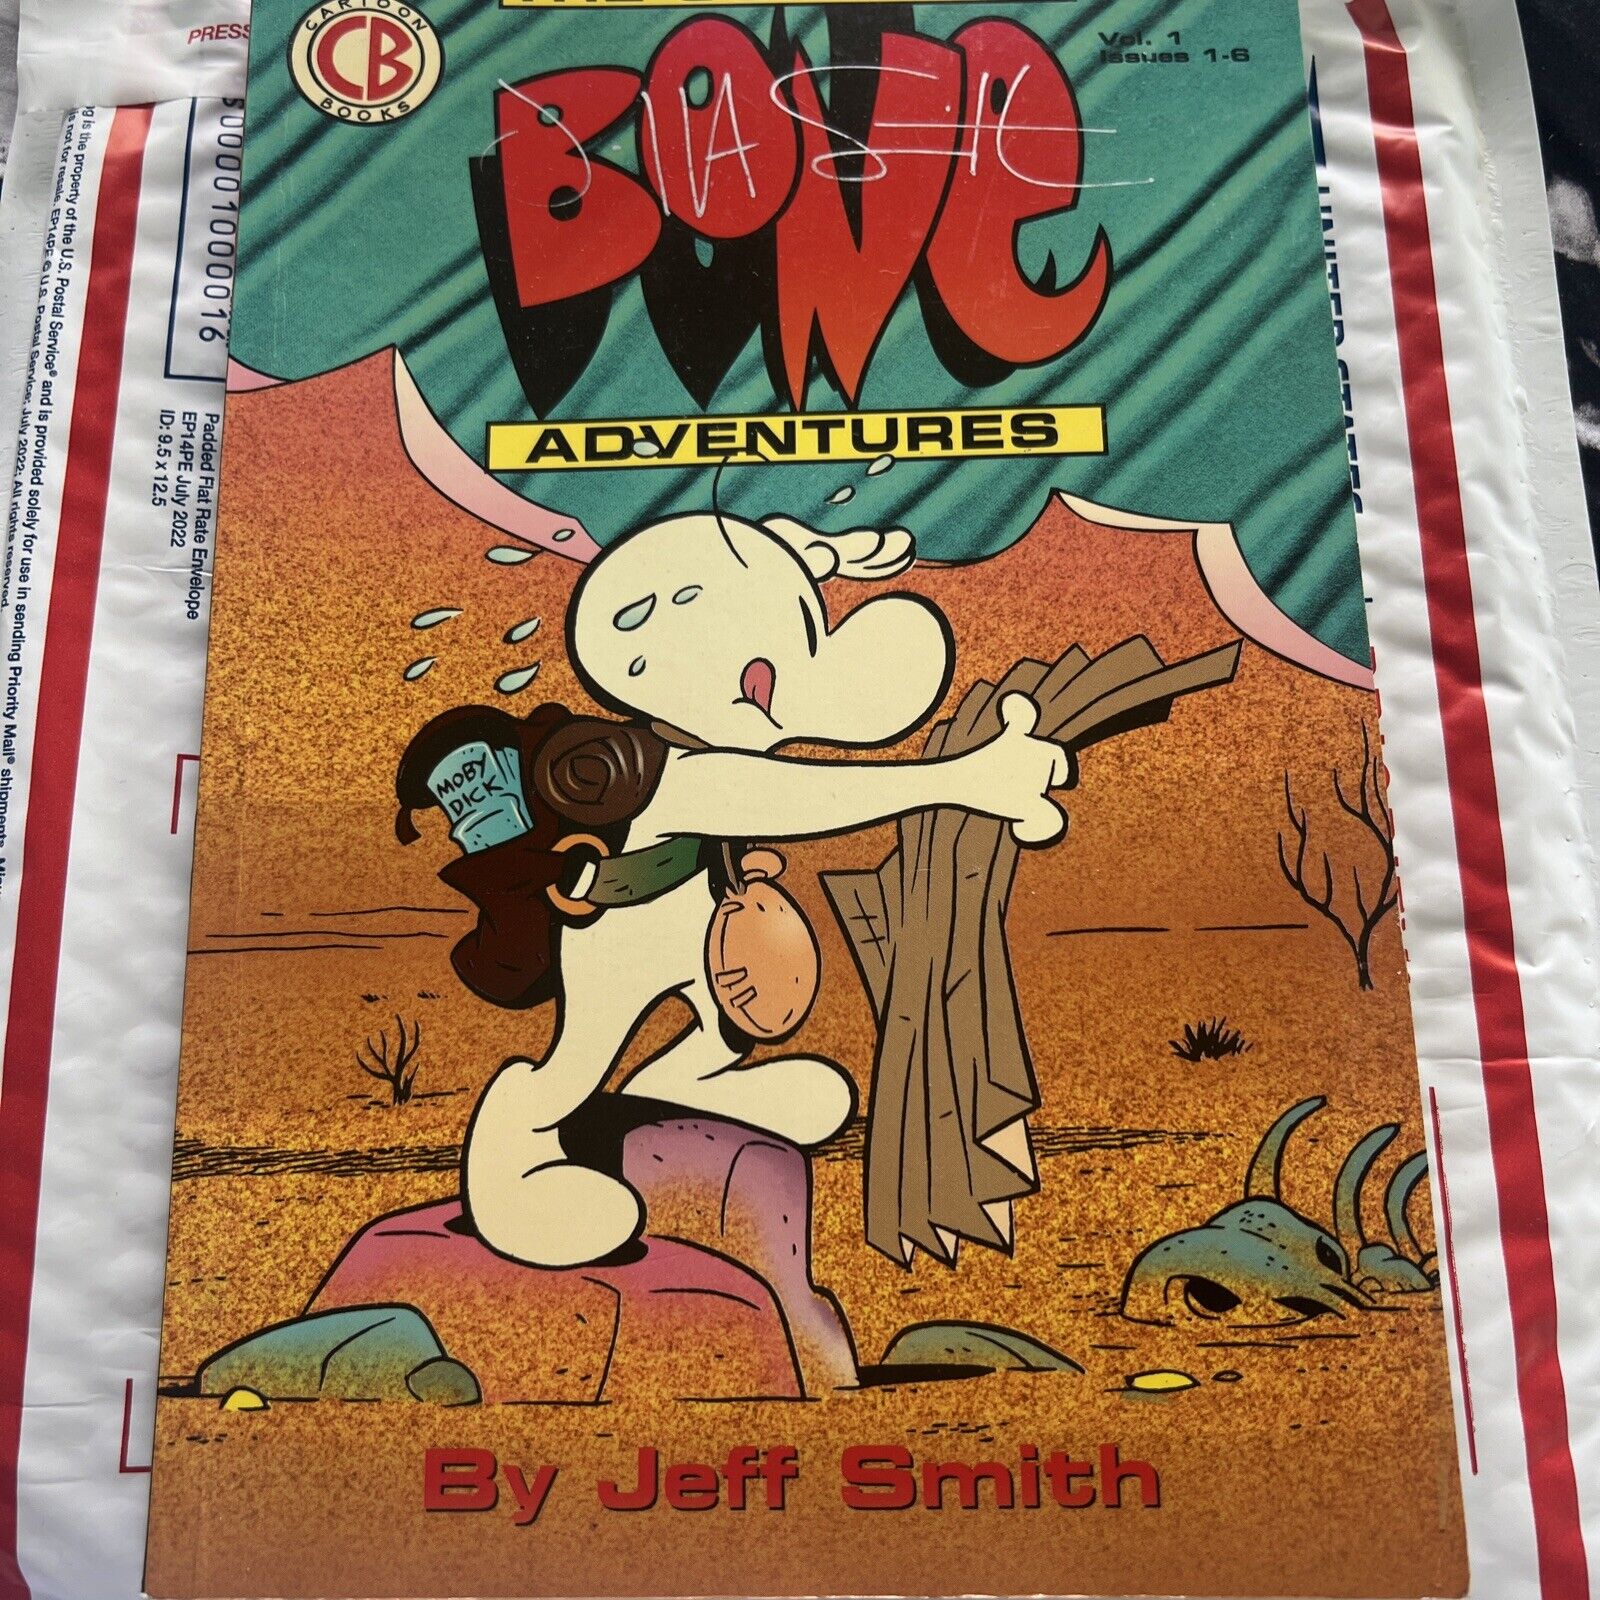 Complete BONE Adventures Vol. 1 1993 Jeff Smith Signed Cover-Used Good